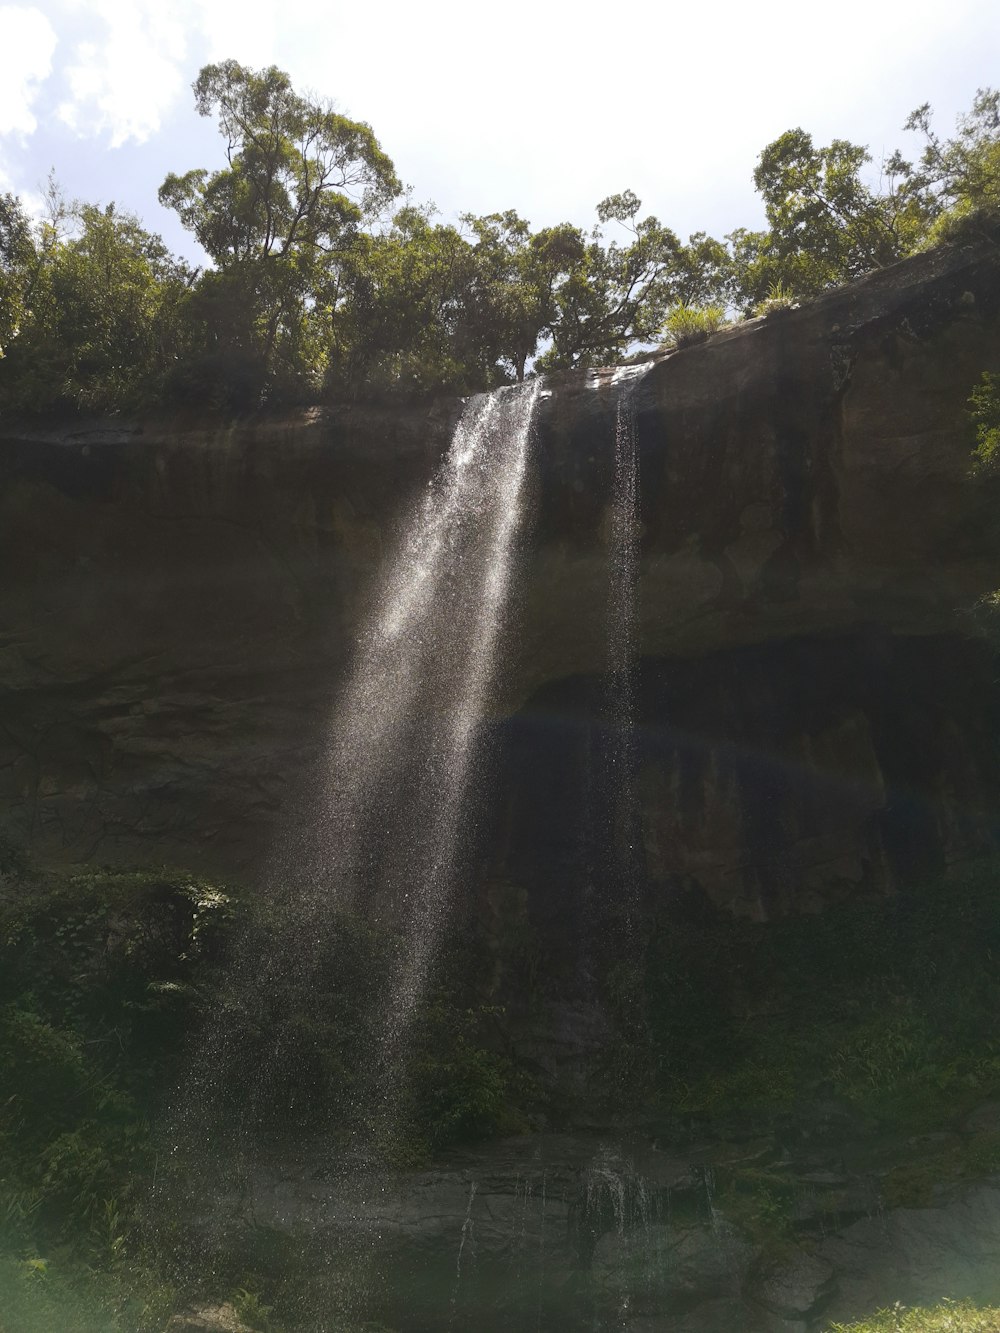 a large waterfall falling down into a body of water